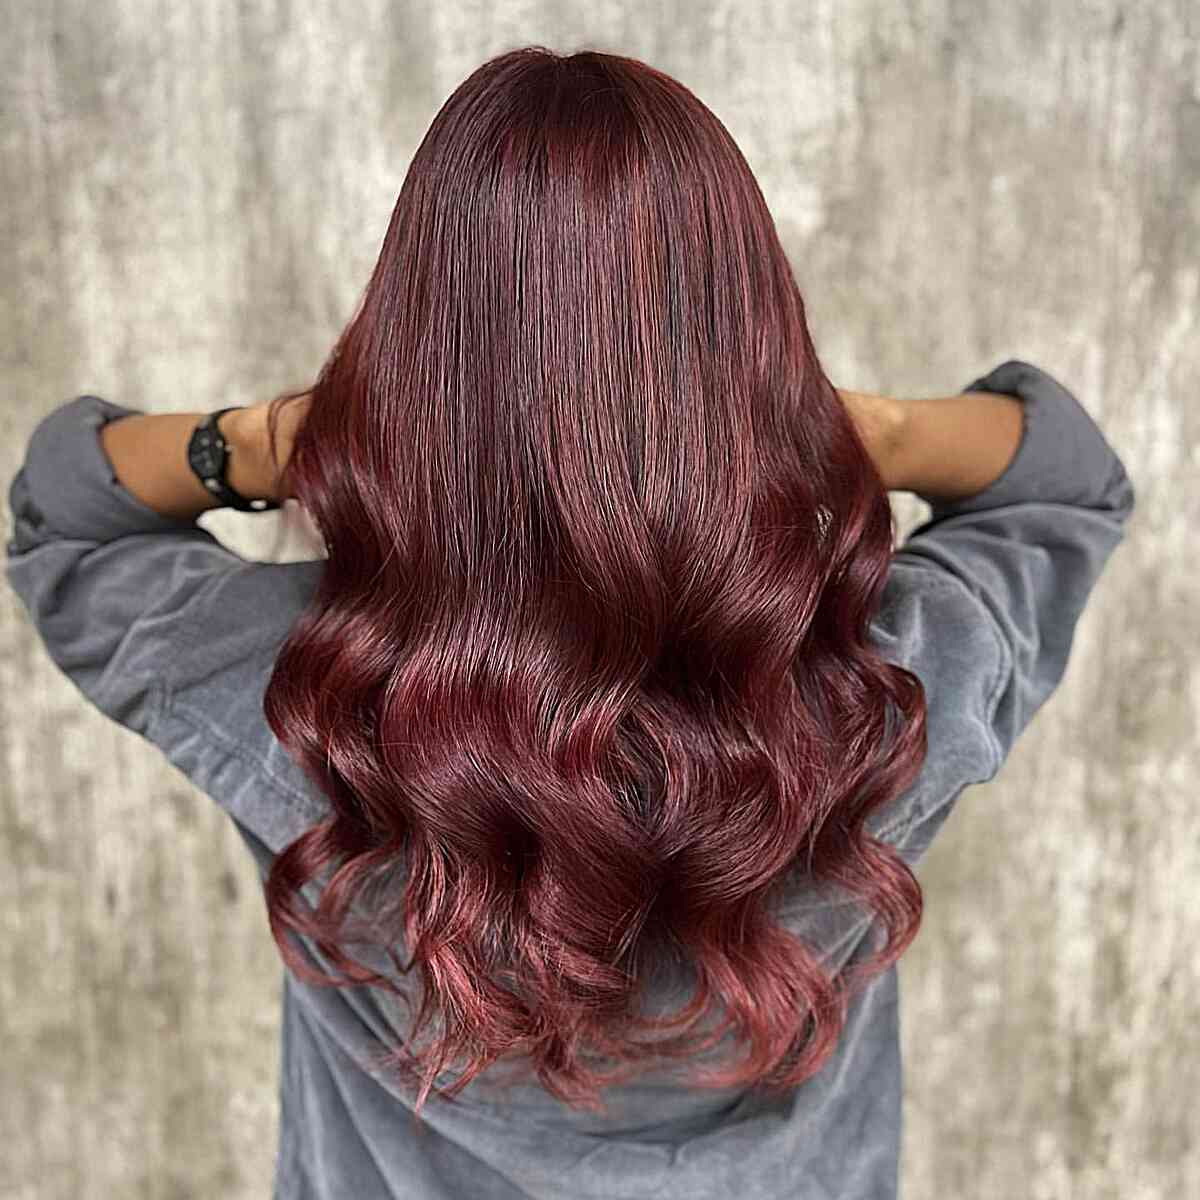 Full Glossy Maroon-Brown Color for Long Hair